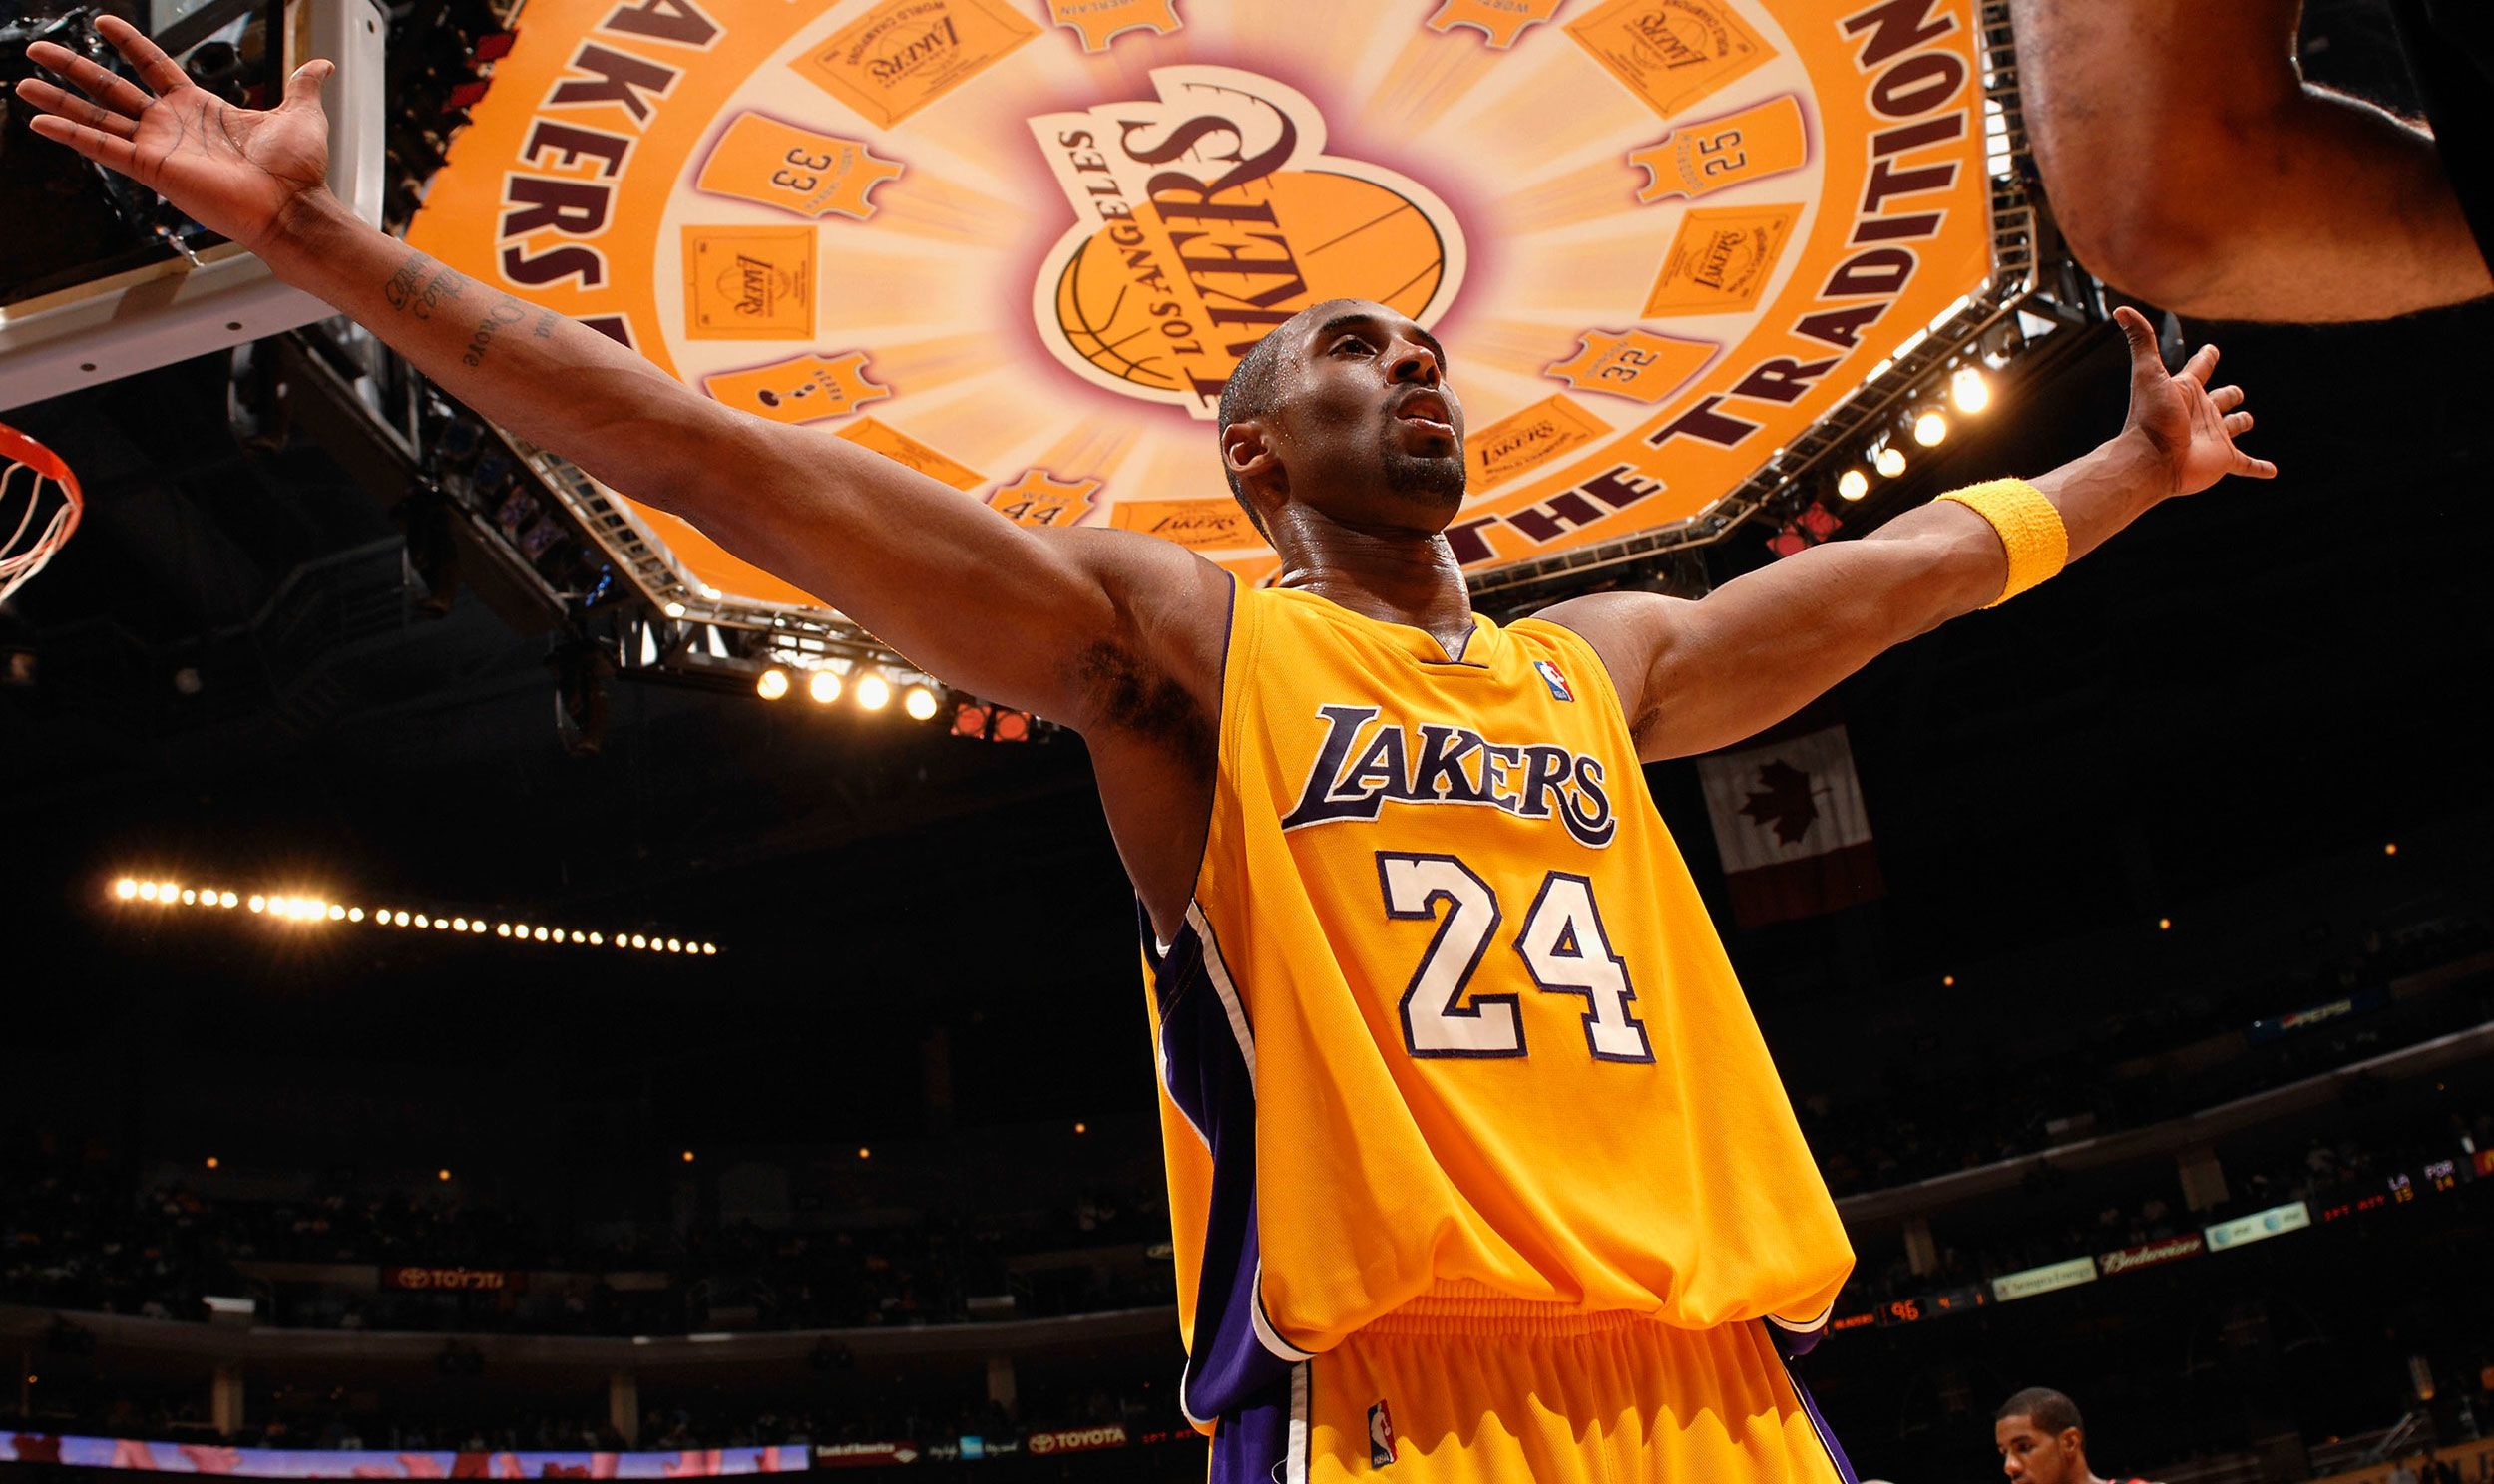 Kobe Bryant: All-Star Shooting Guard (Exceptional African